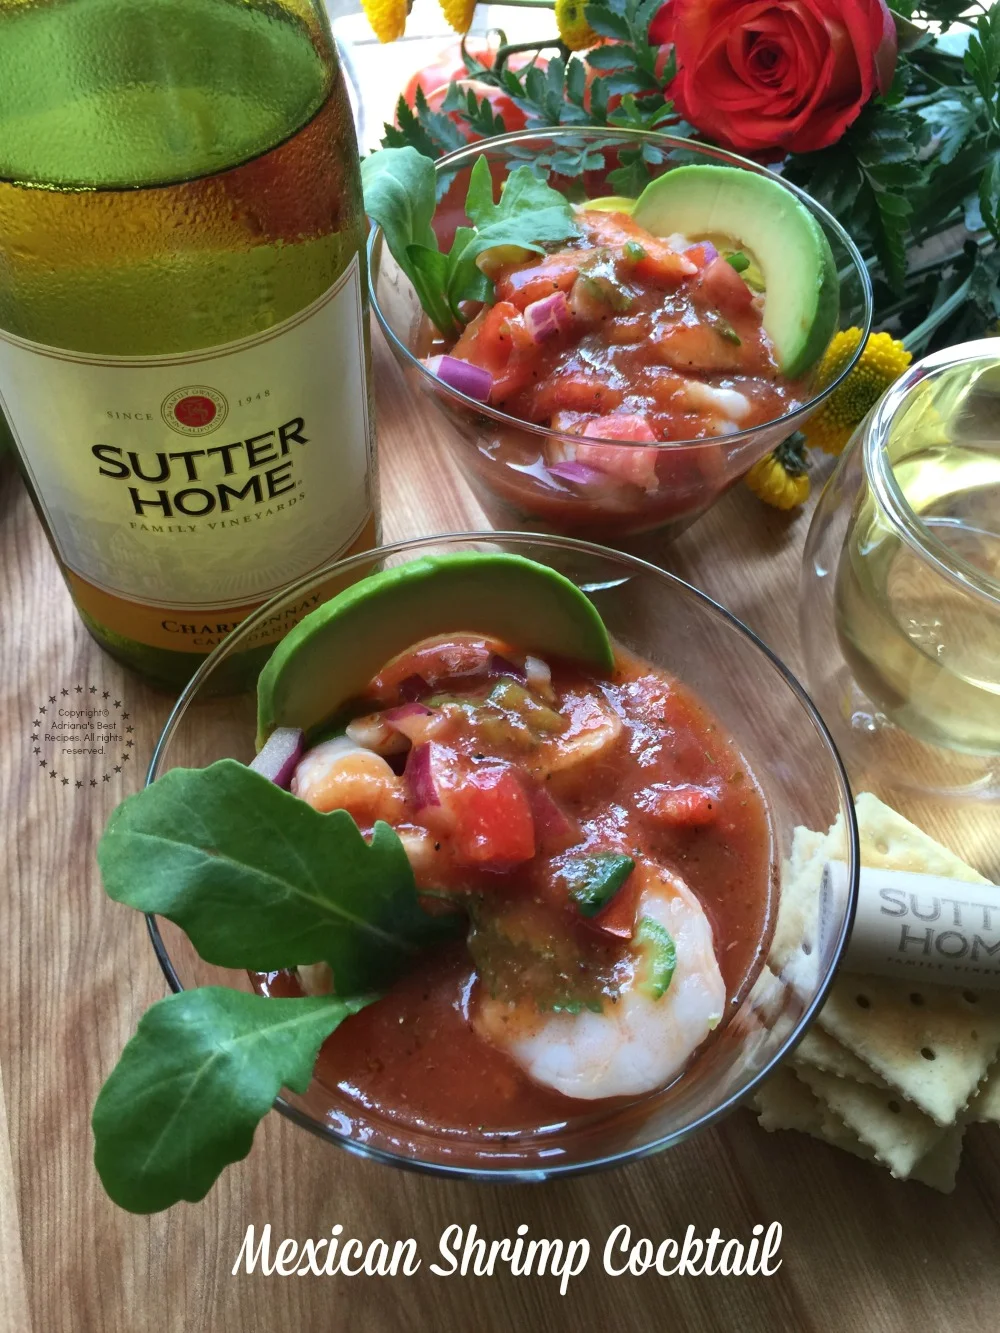 This Mexican Shrimp Cocktail is a perfect appetizer to start a special dinner with a glass of chilled Sutter Home Chardonnay wine to uncork the moments